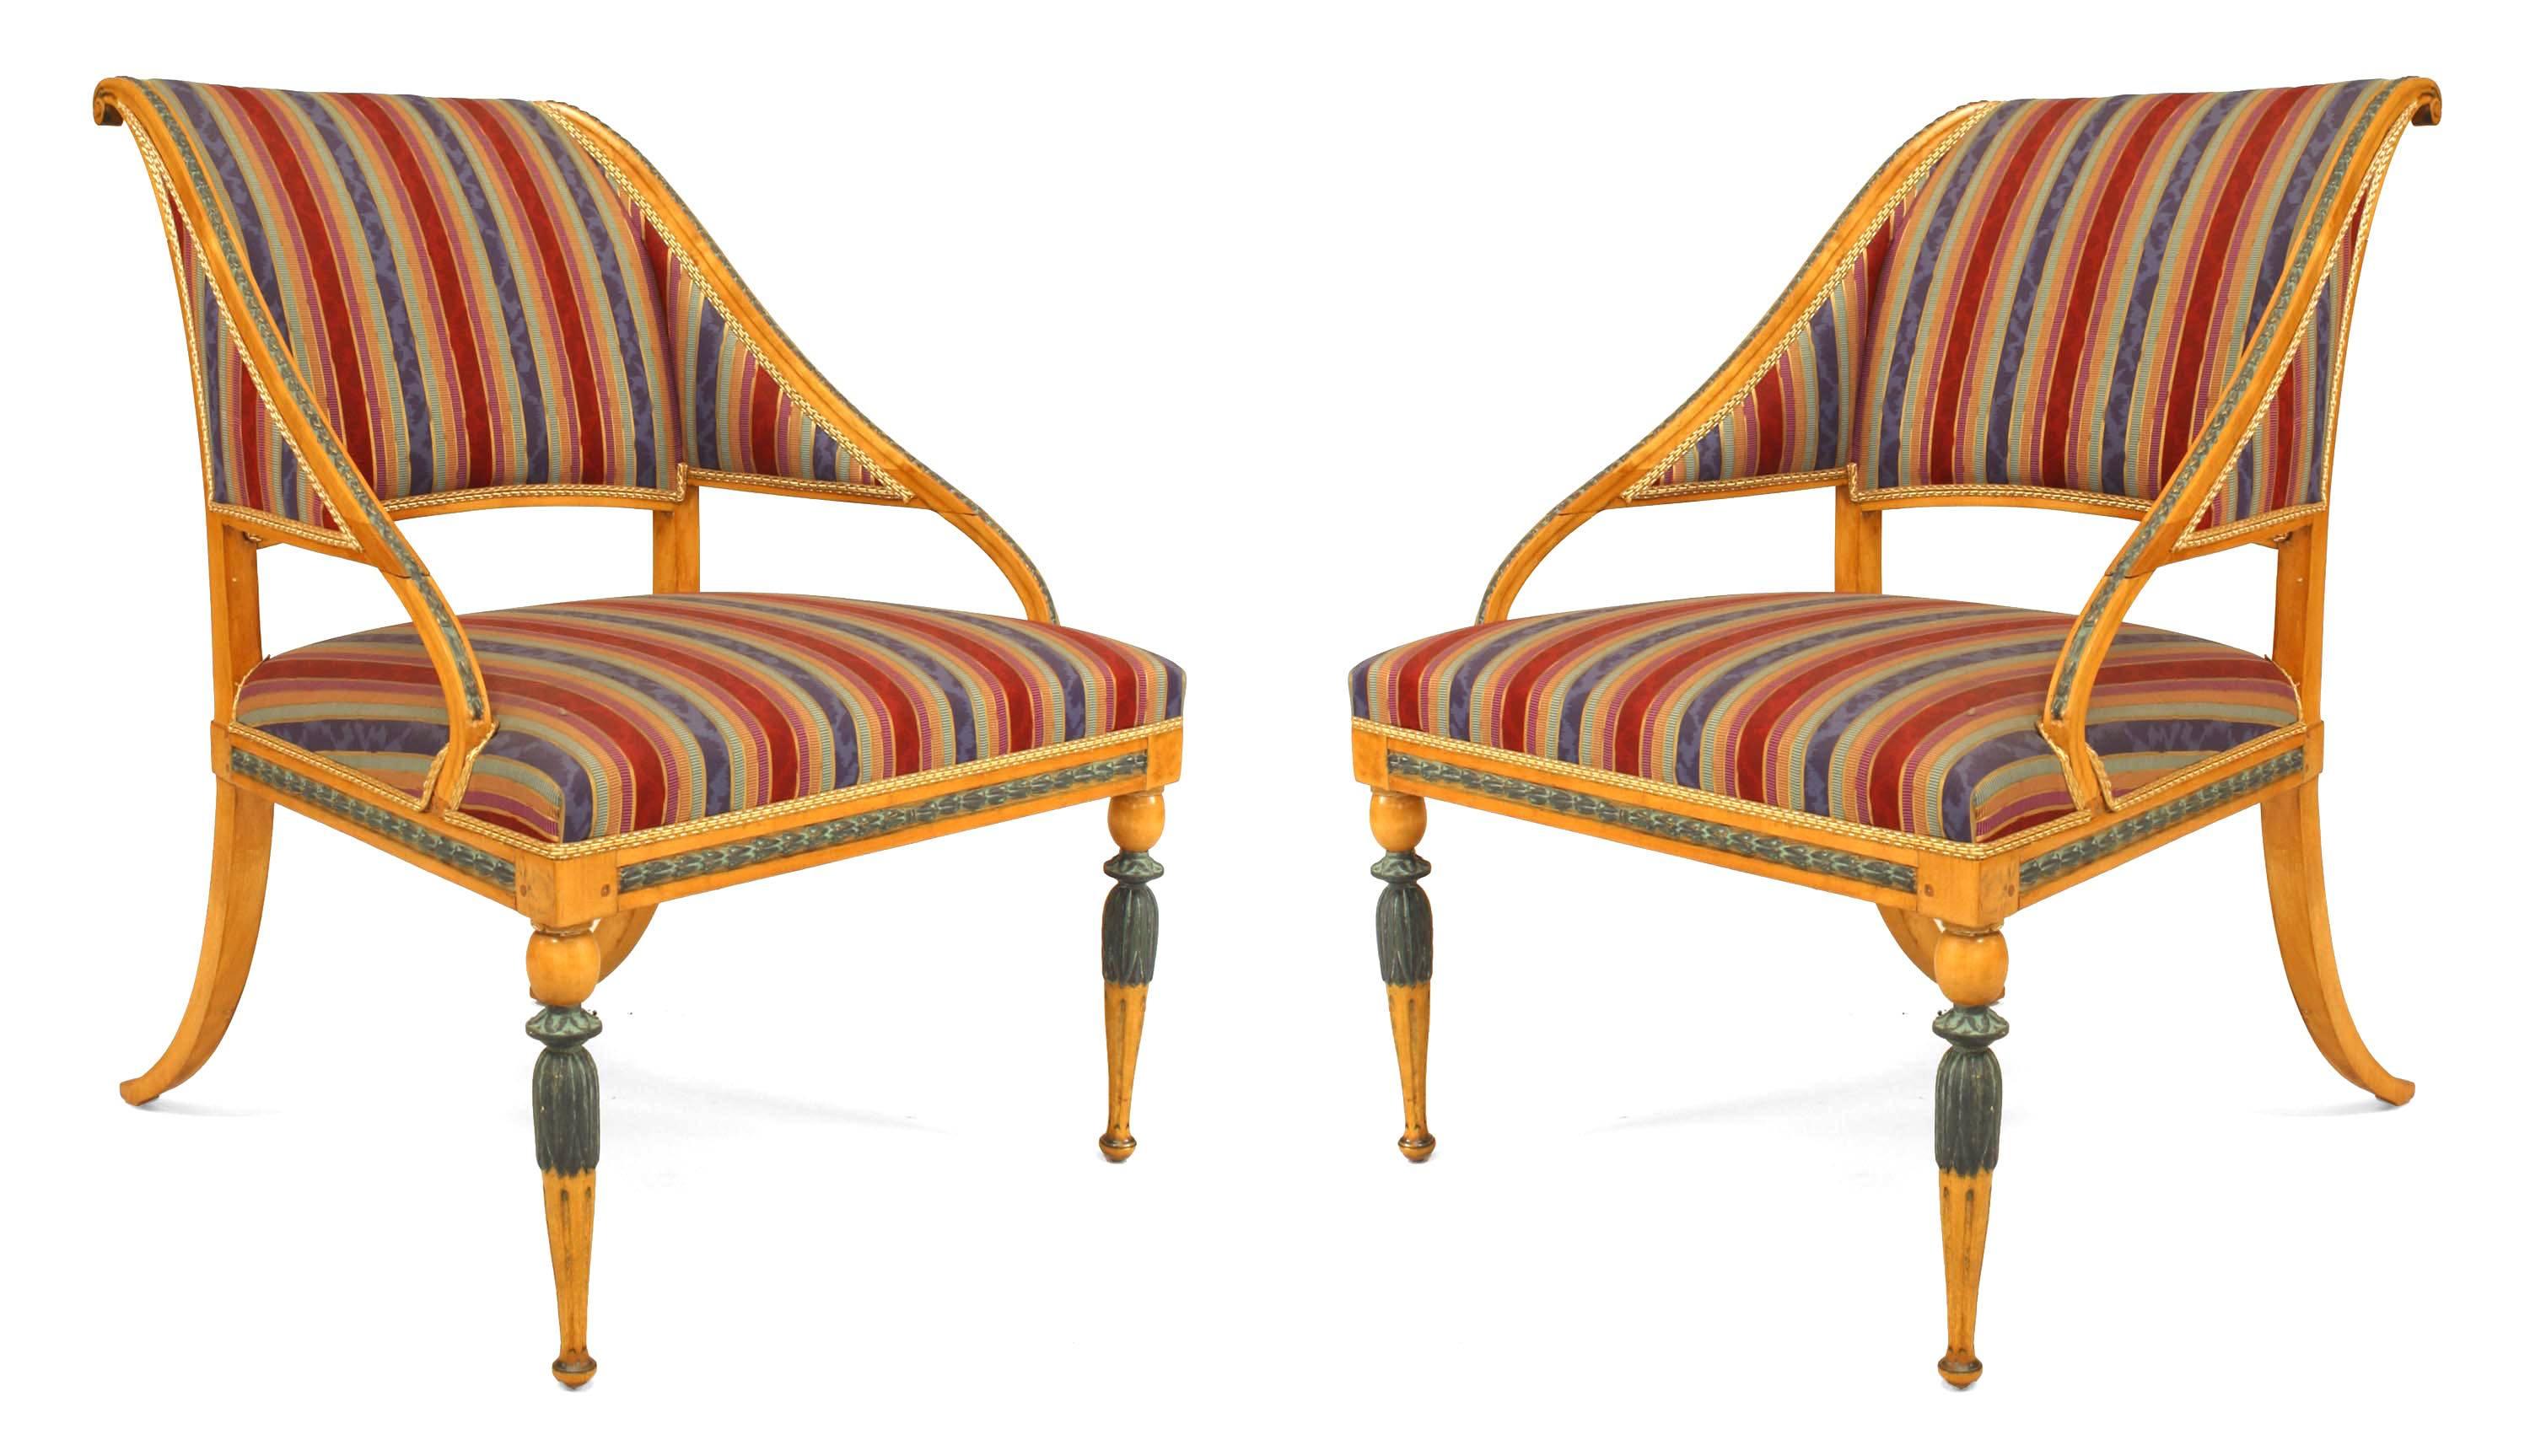 Pair of Swedish Neoclassic patinated composition & birch Armchairs with sleigh form back & seat upholstered in red & blue striped cotton. (late 18th/early 19th Cent)
